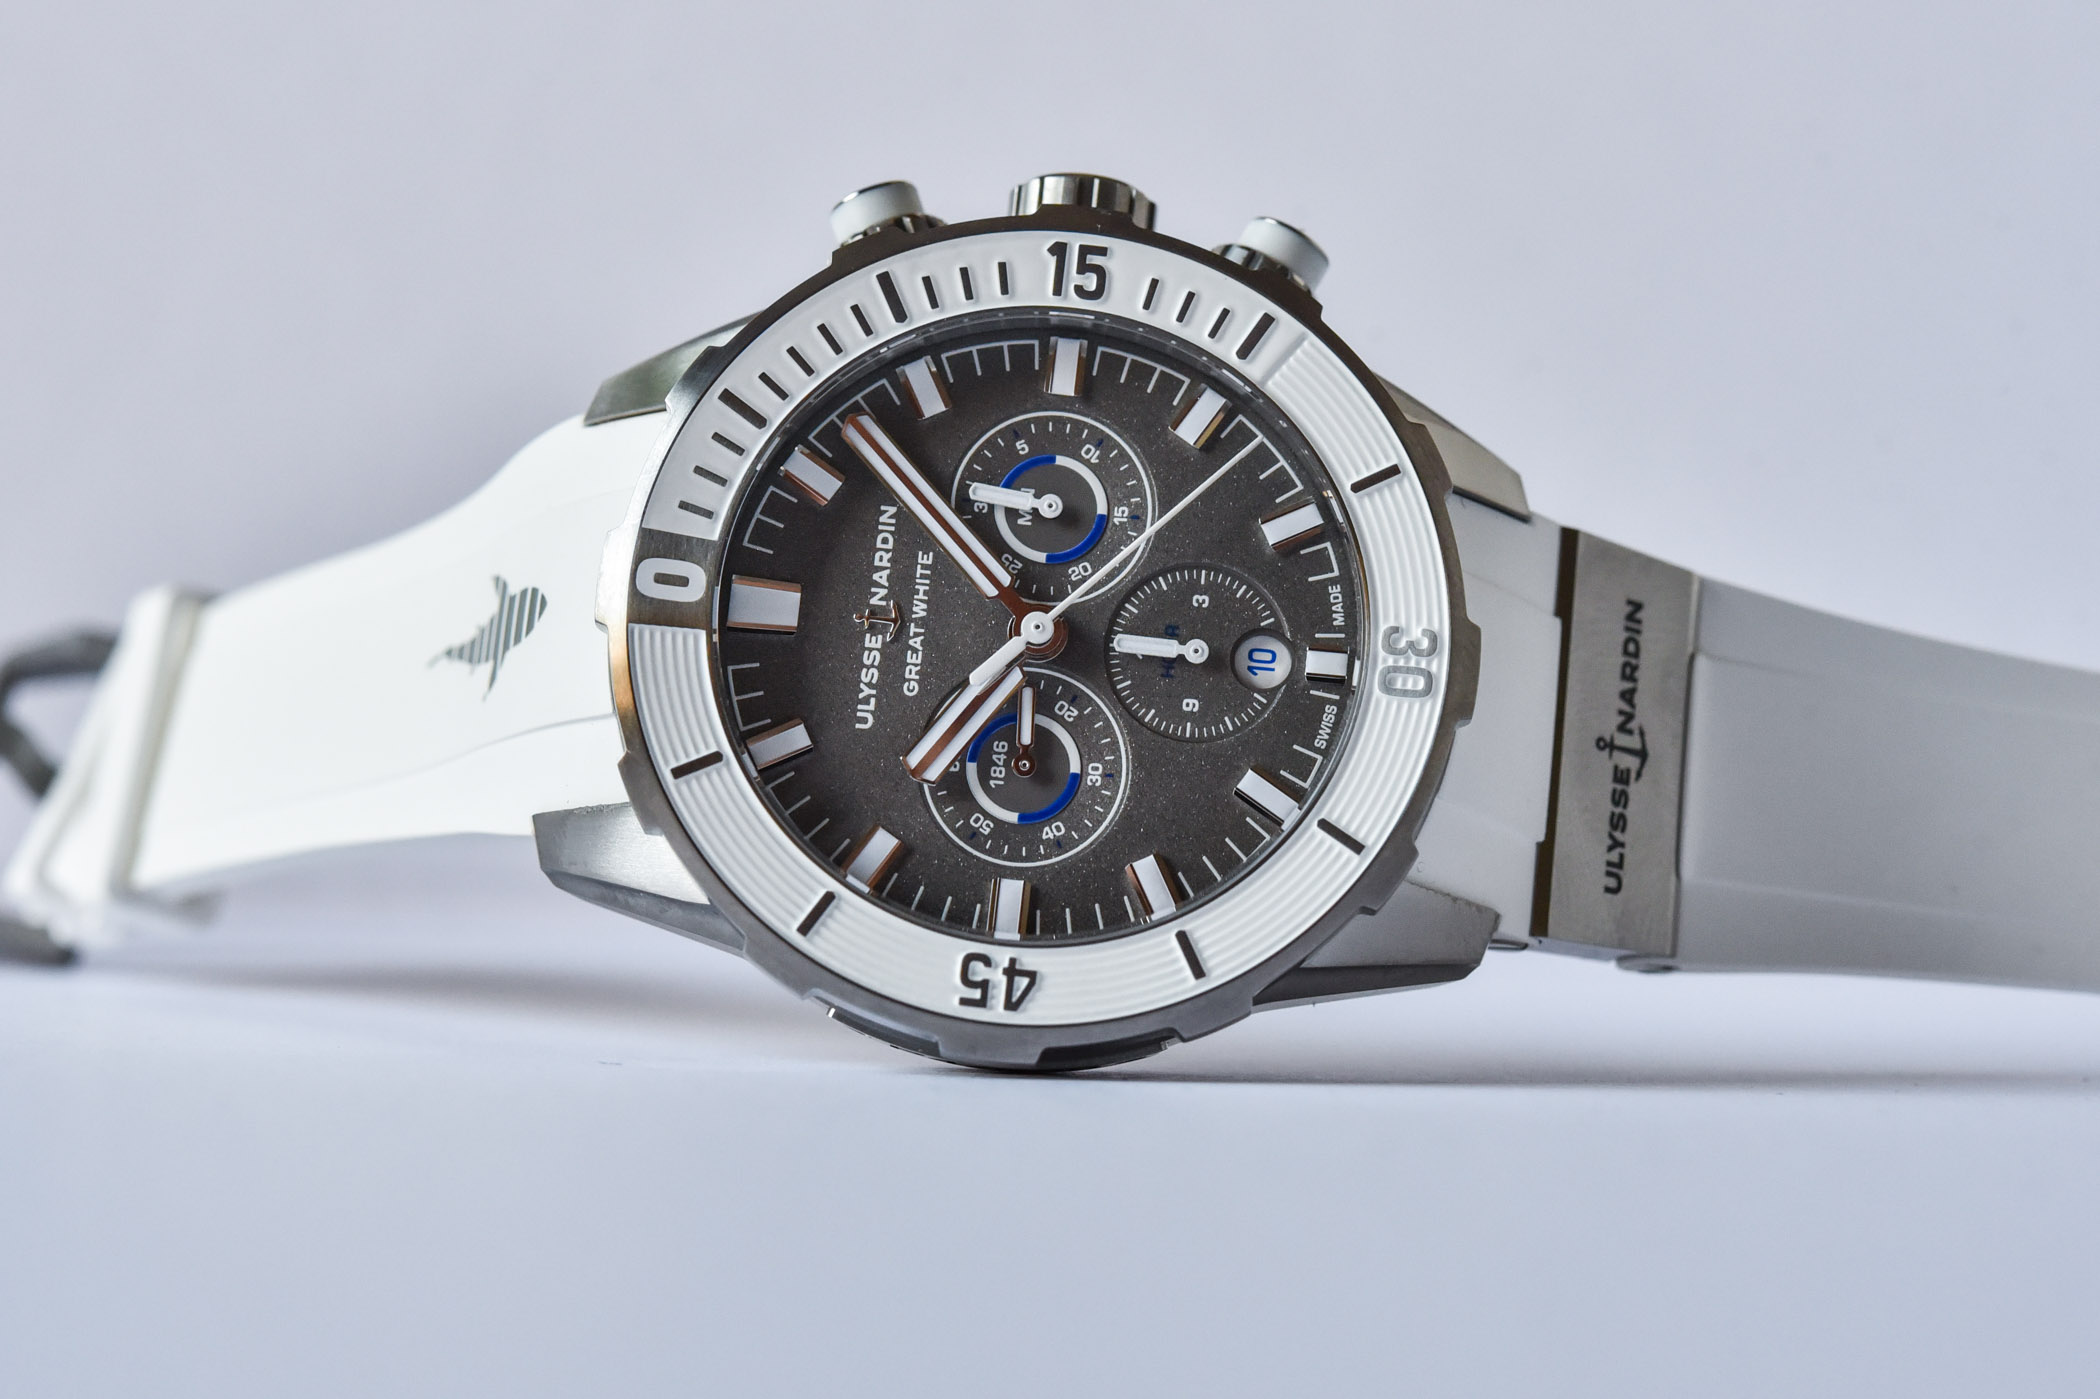 Ulysse Nardin Diver Chronograph Great White Limited Edition